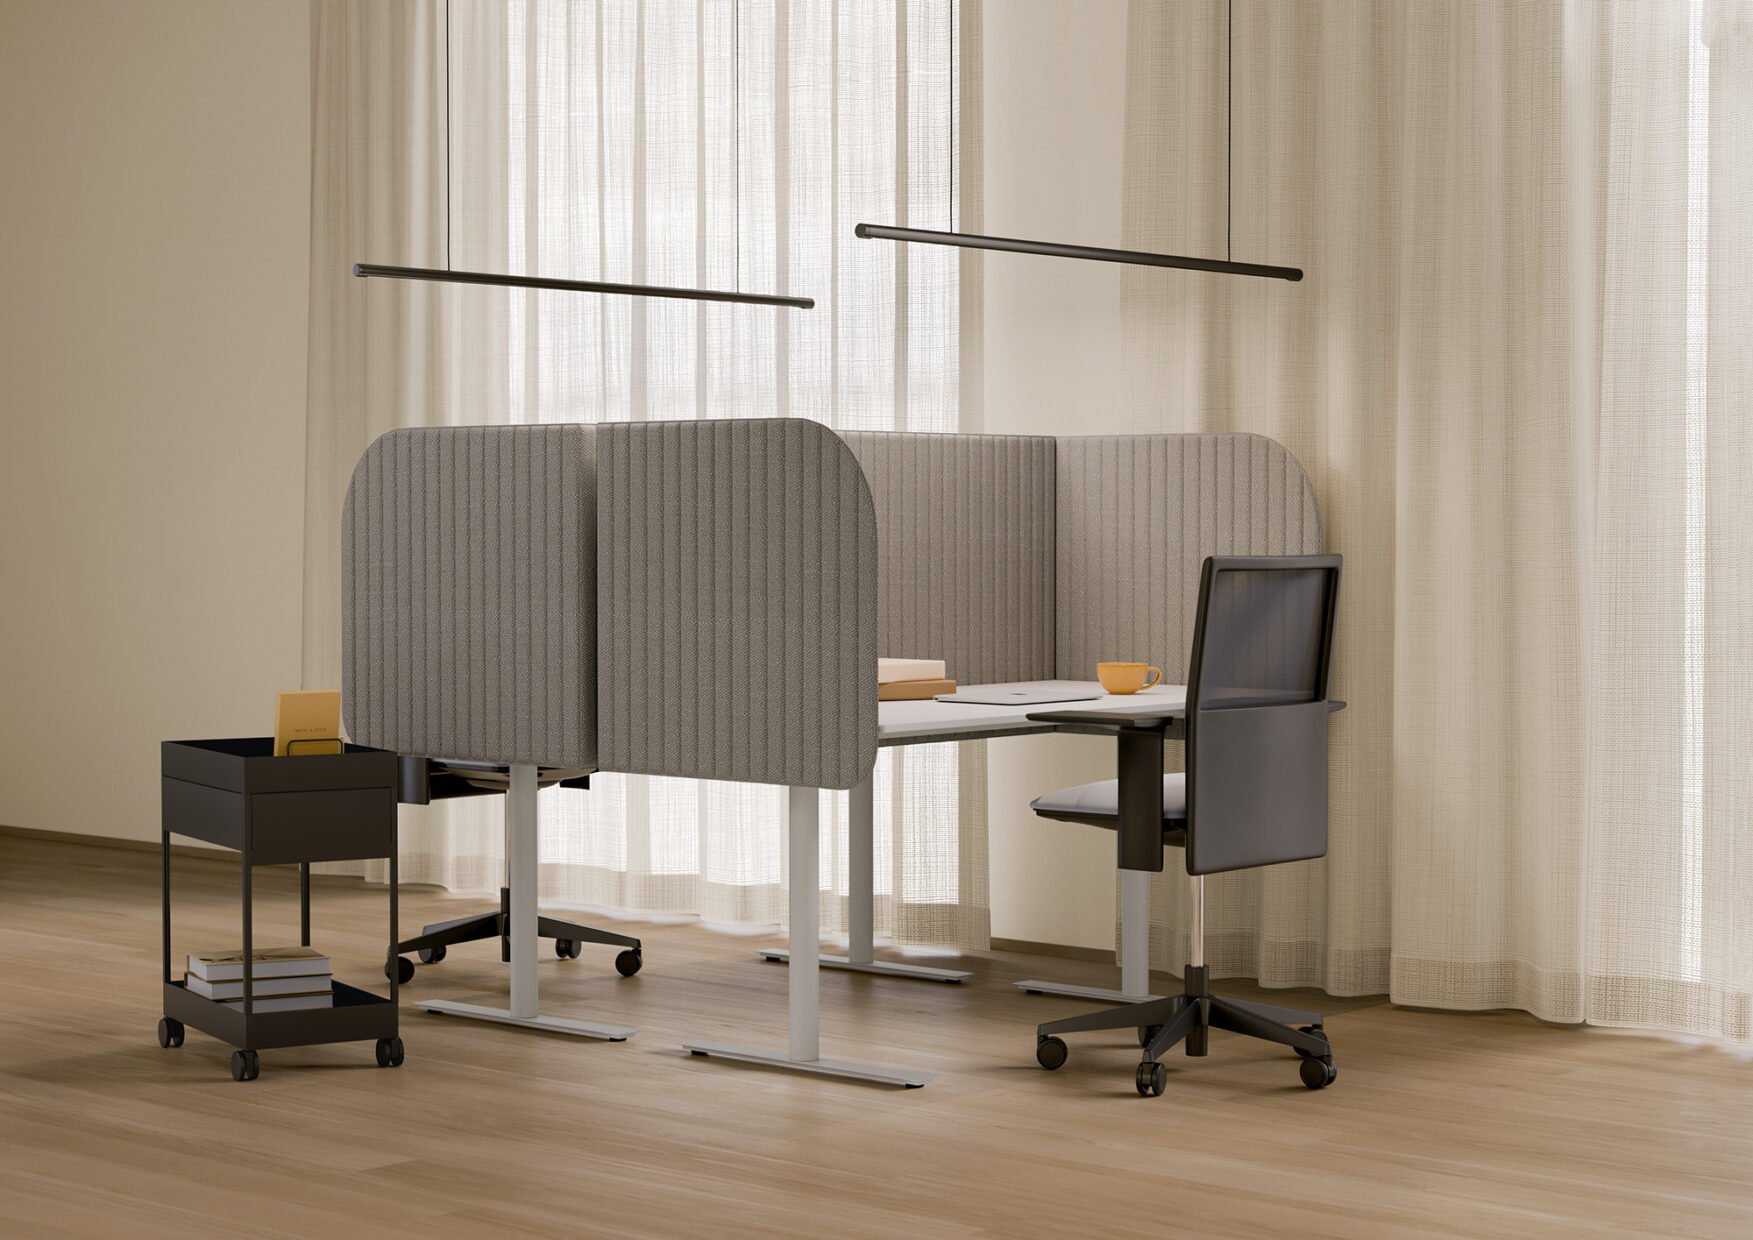 Office-with-focus-desk-divider-square-corners-1753x1240.jpg